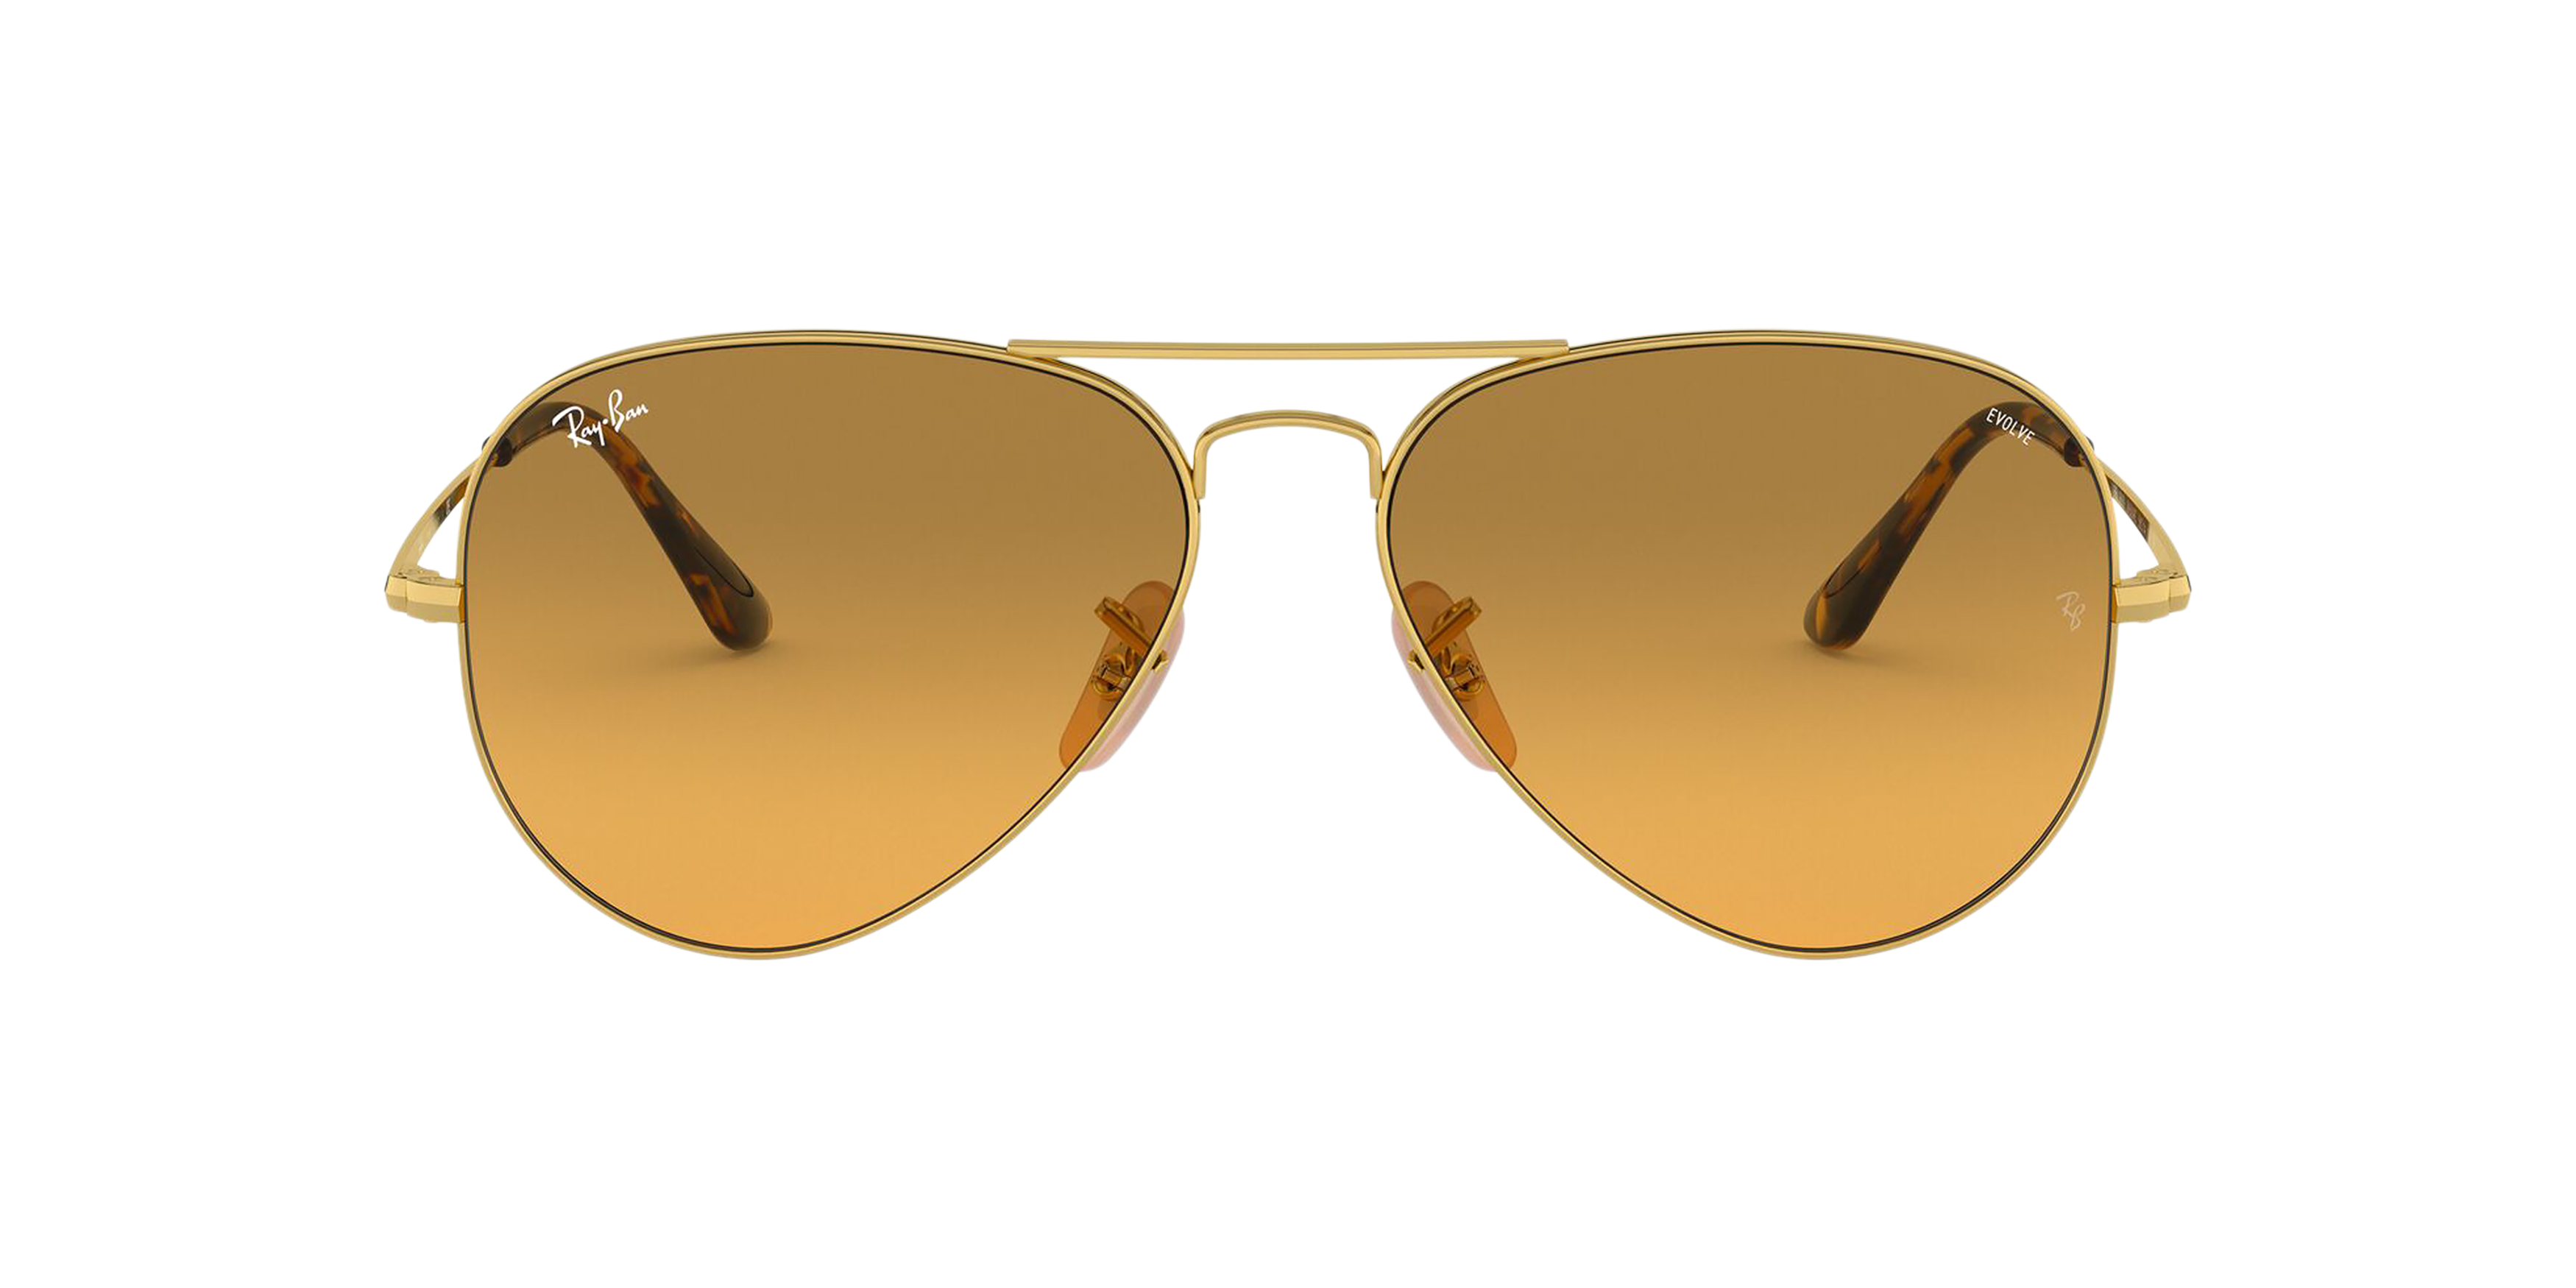 [products.image.front] Ray-Ban Washed Evolve RB3689 9150AC